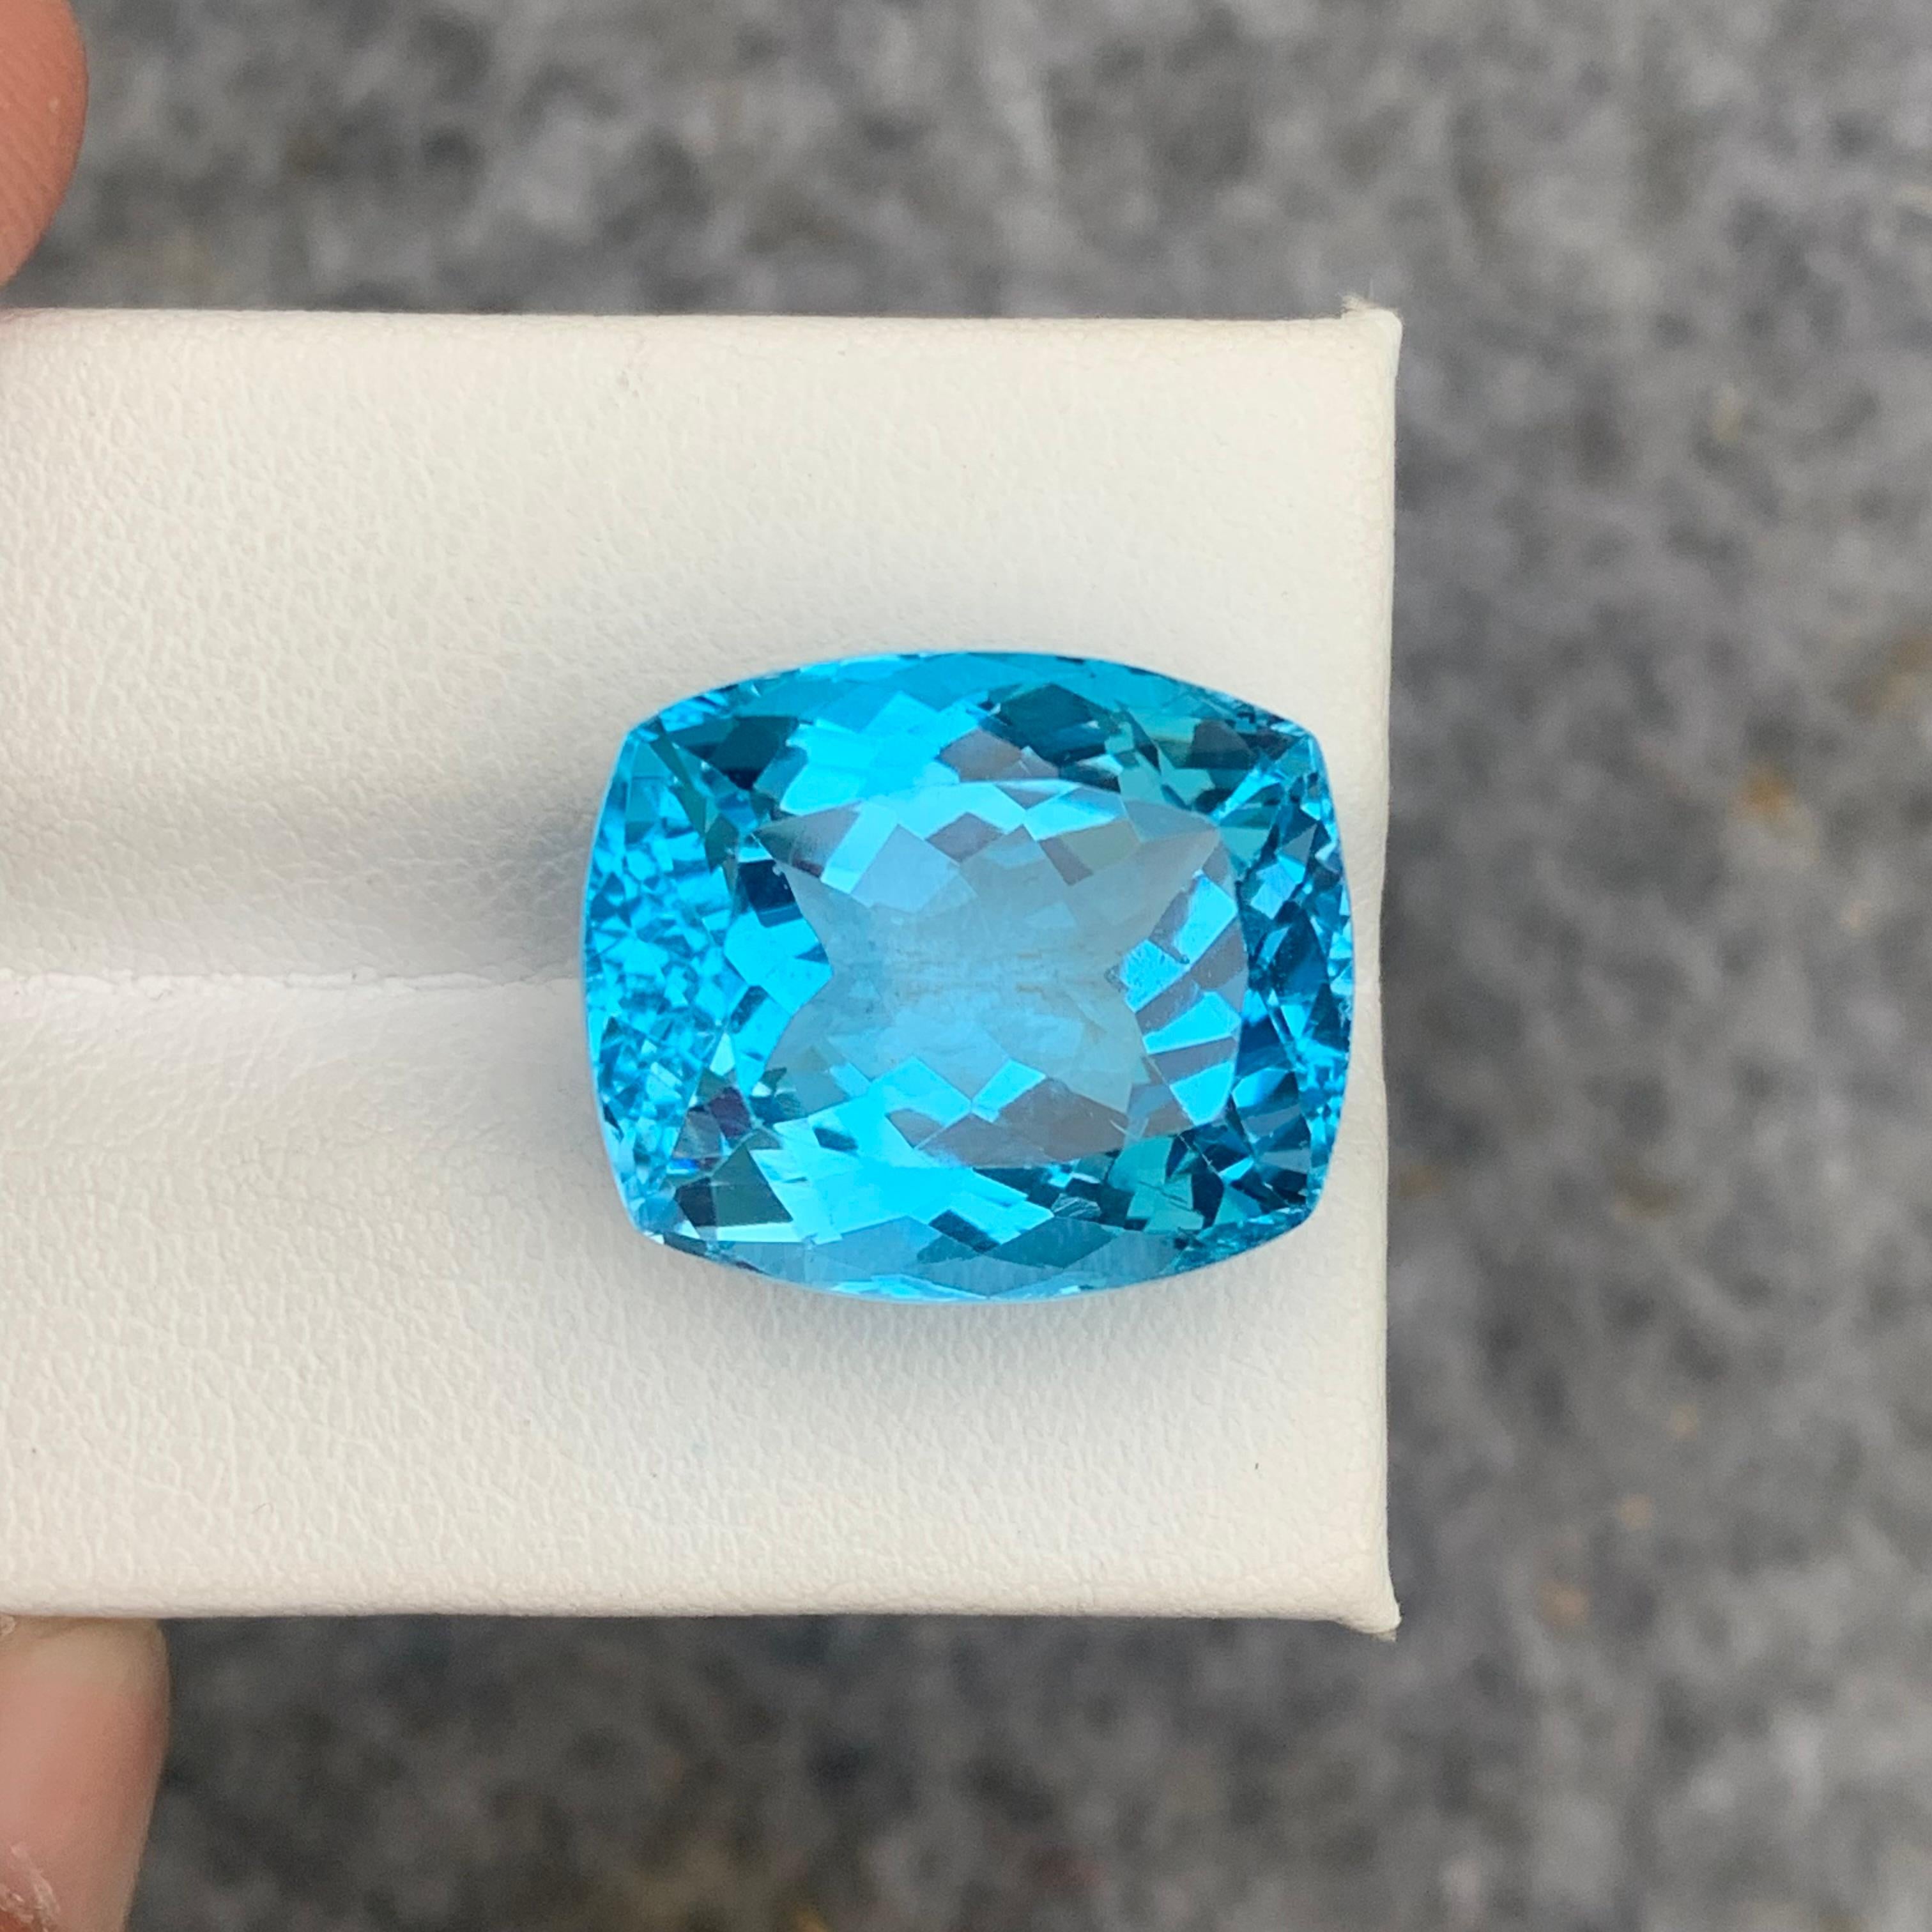 Gorgeous 31.10 Carat Loose Blue Topaz from Brazil Long Cushion Cut for Jewelry 6